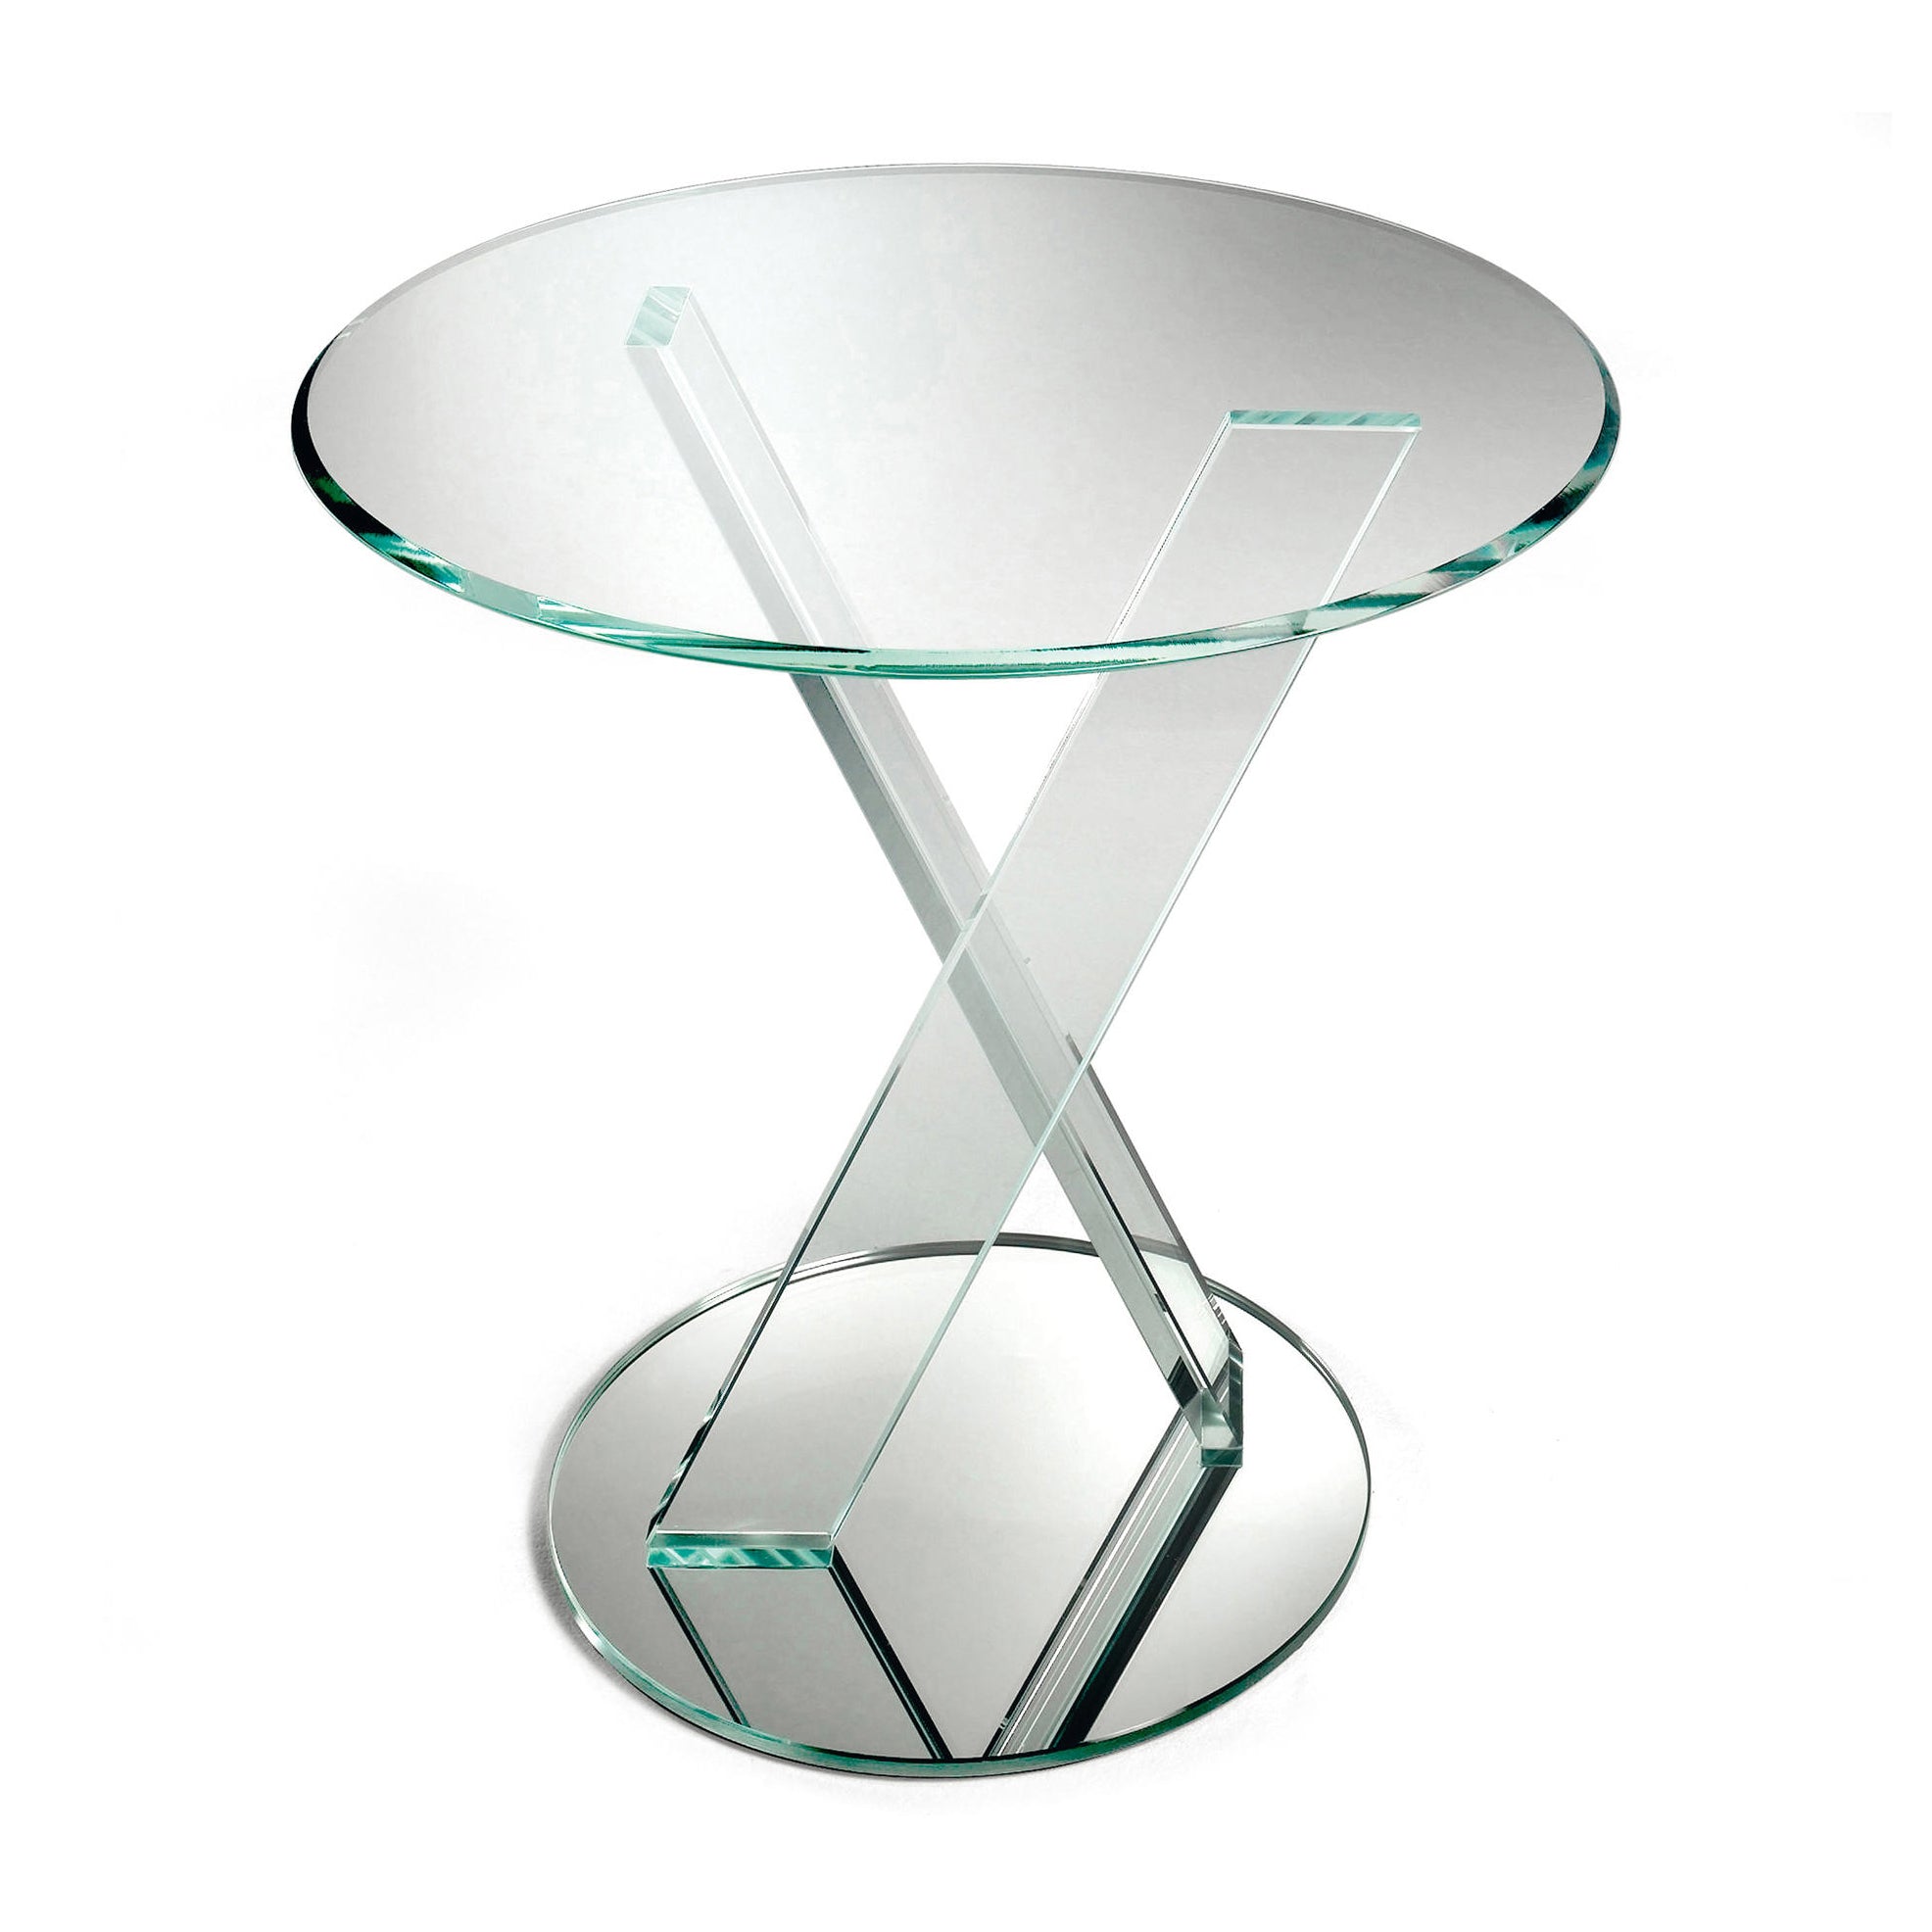 MISTER X side table1